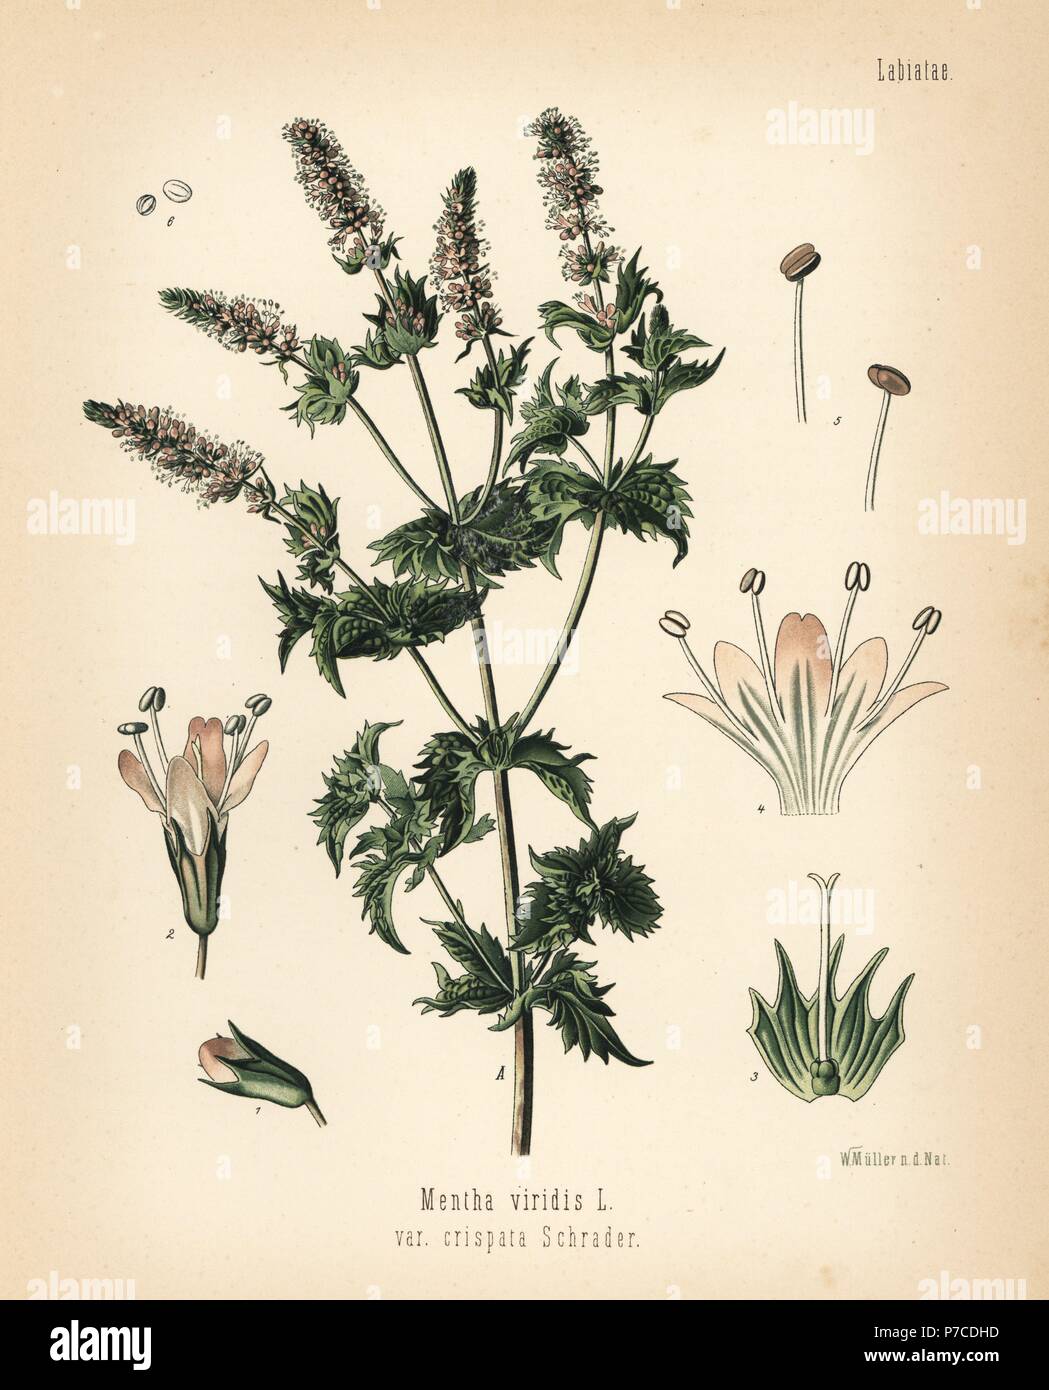 Spearmint, Mentha spicata (Mentha viridis var. crispata). Chromolithograph after a botanical illustration by Walther Muller from Hermann Adolph Koehler's Medicinal Plants, edited by Gustav Pabst, Koehler, Germany, 1887. Stock Photo